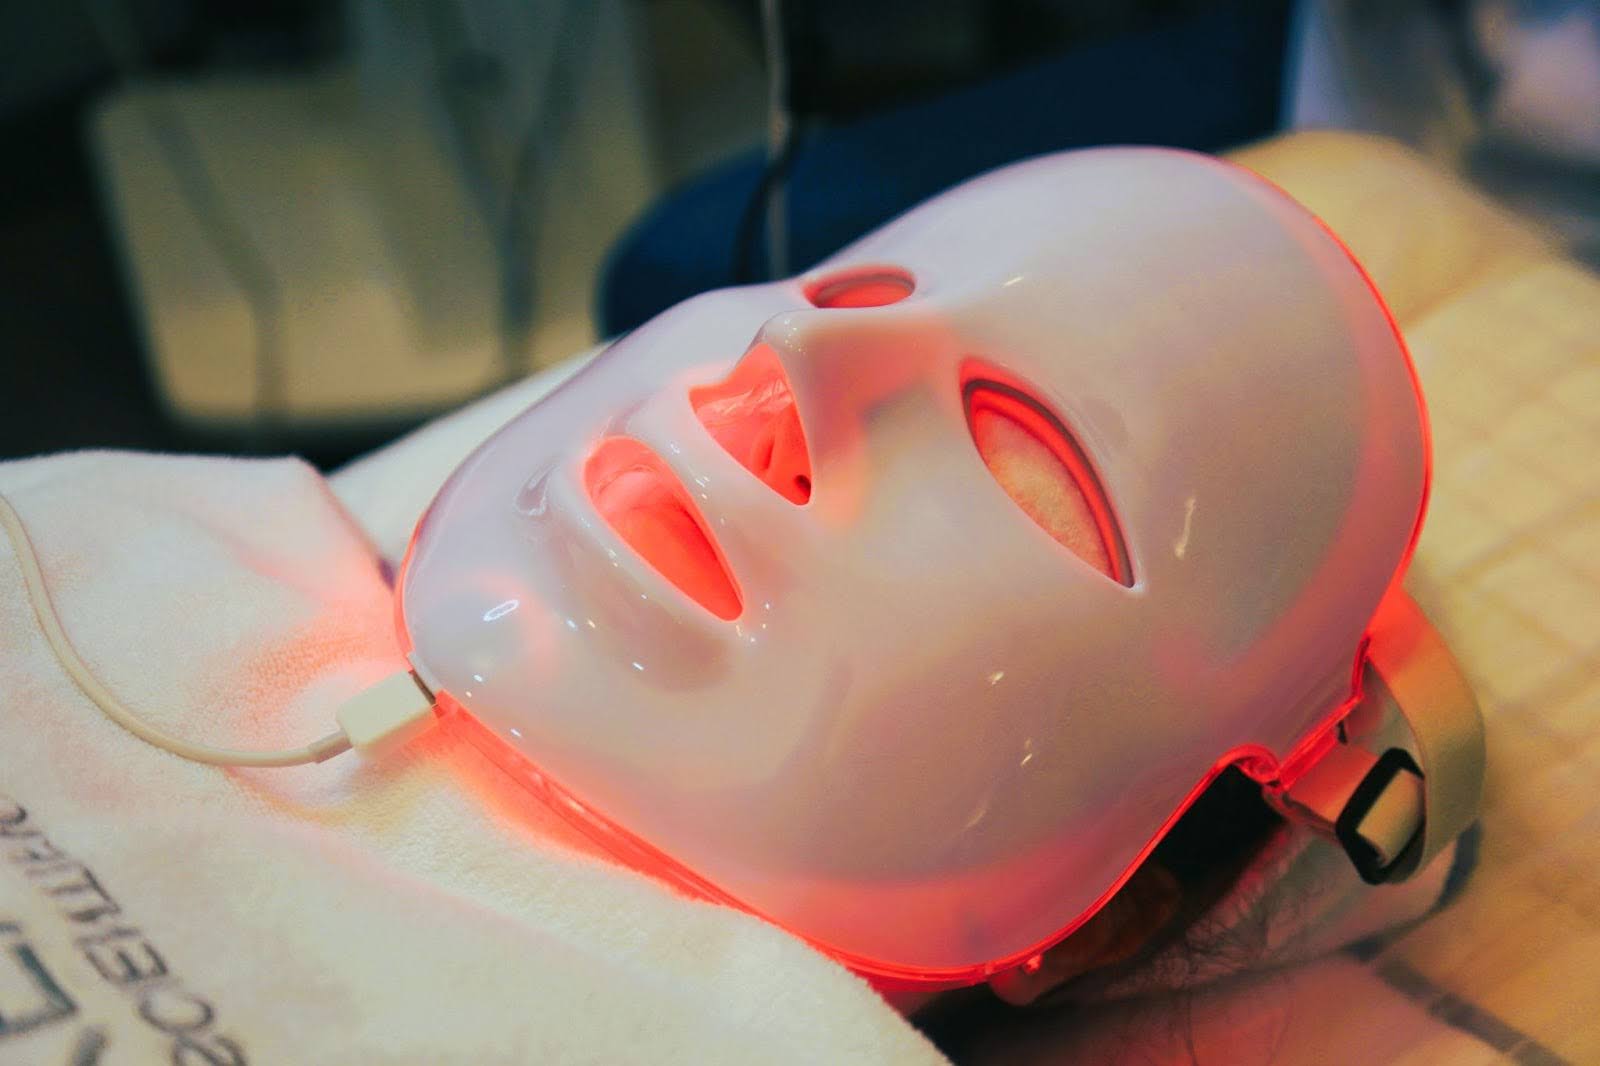 Person demonstrates how a red light therapy mask works.